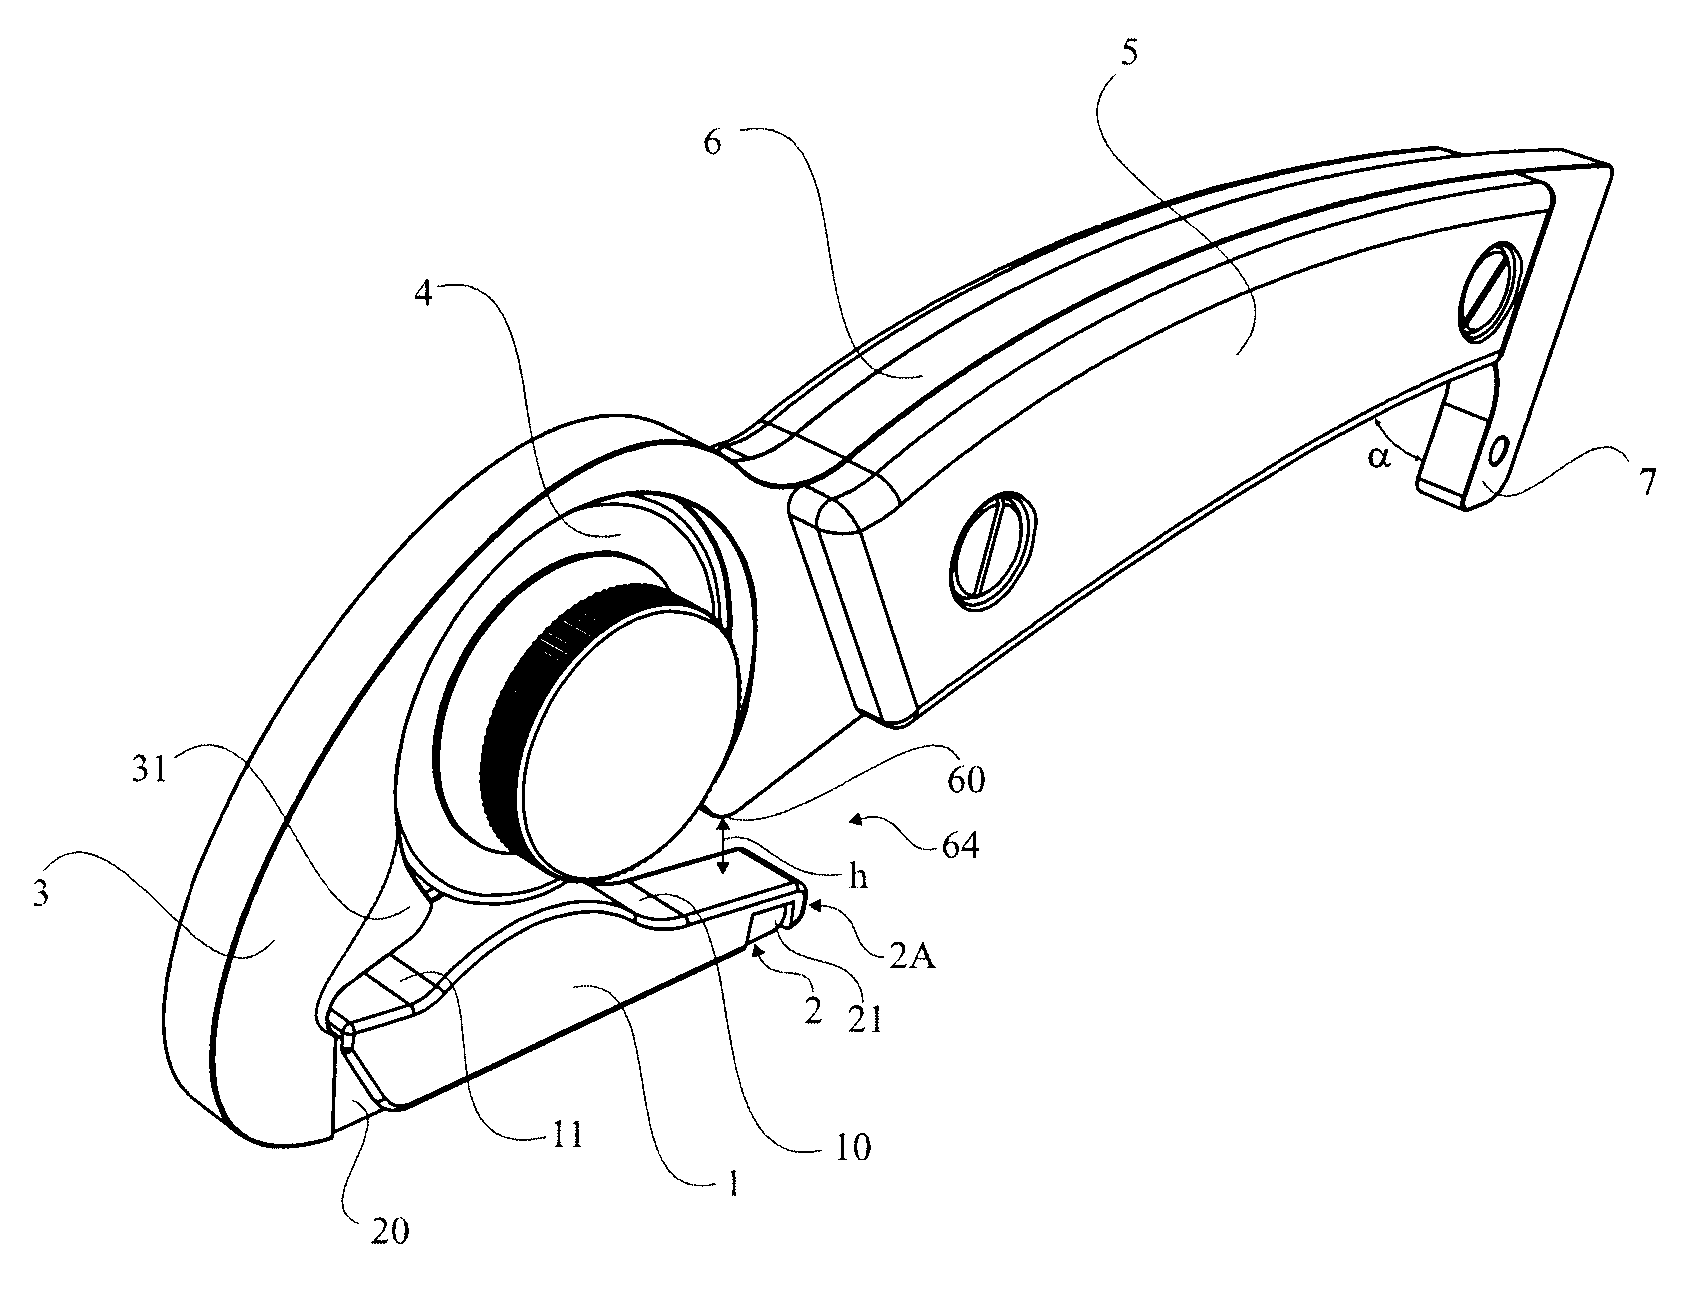 Hand-held cutting device